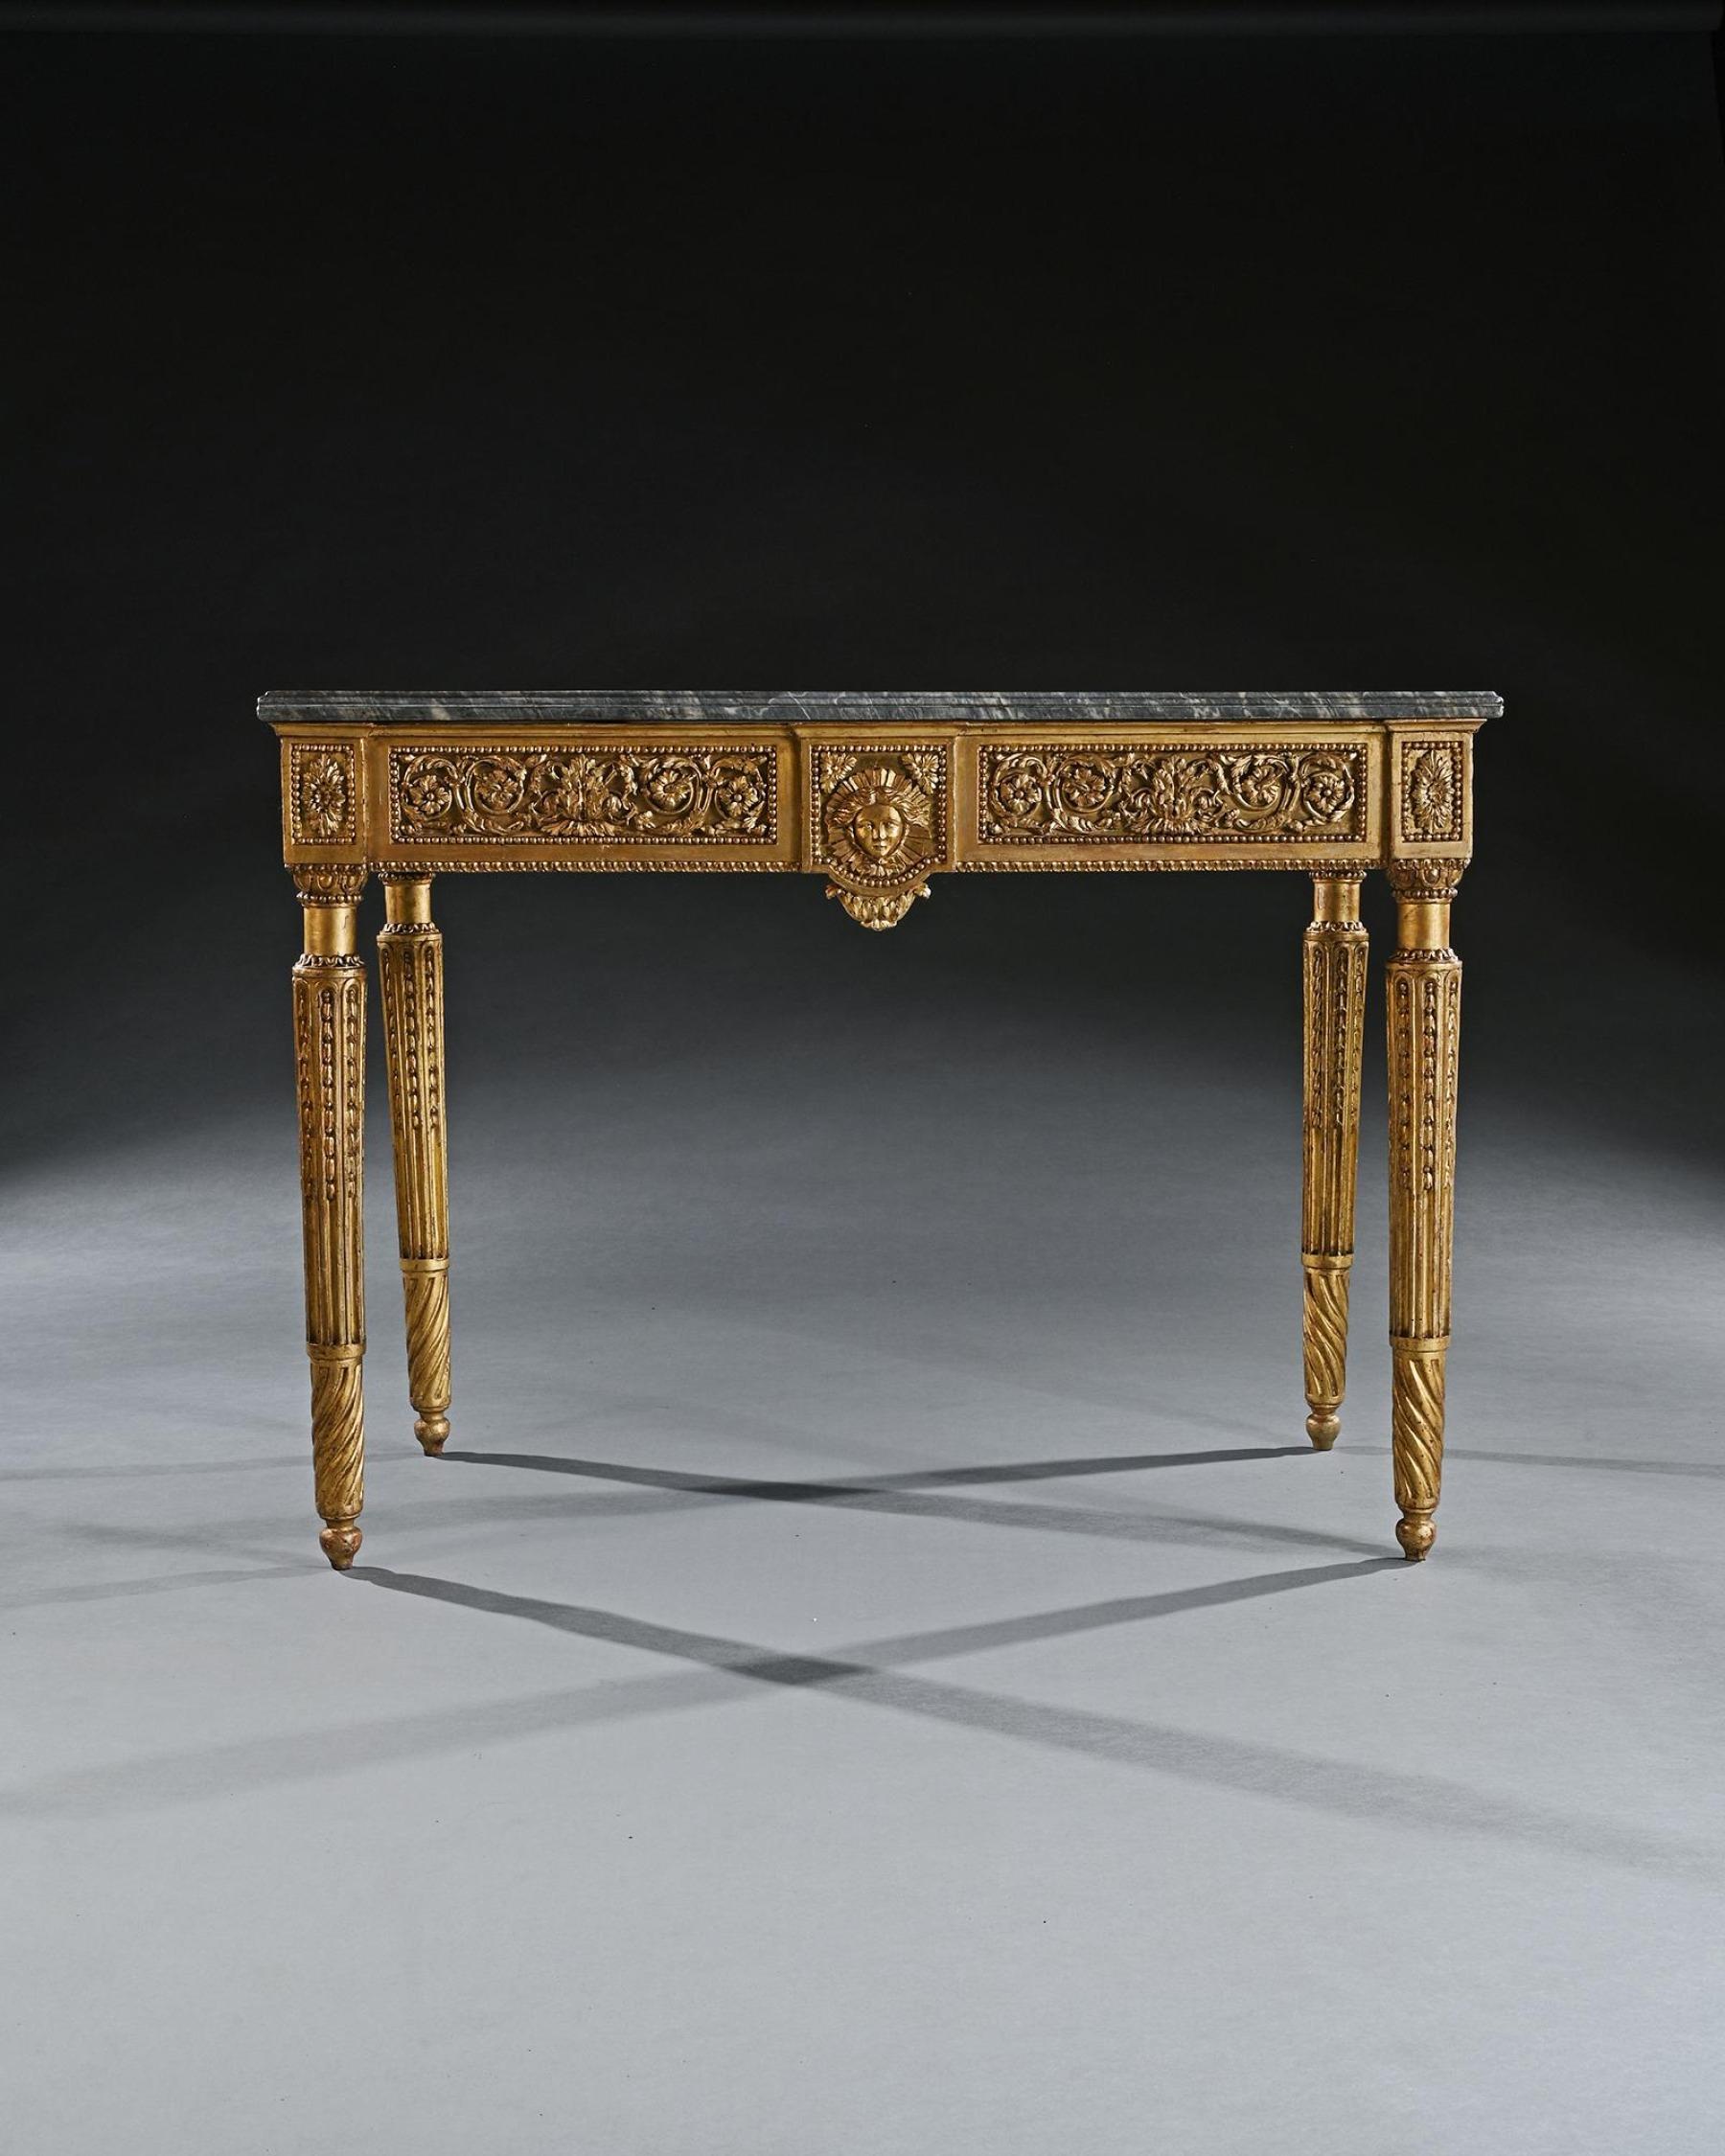 Very fine late 18th Century Italian gilt wood console table with marble top possibly from Florentine.

Italian Possibly Florentine - Circa 1780

This exceptionally fine table, of rectangular design, achieves its exquisite decorative impact through